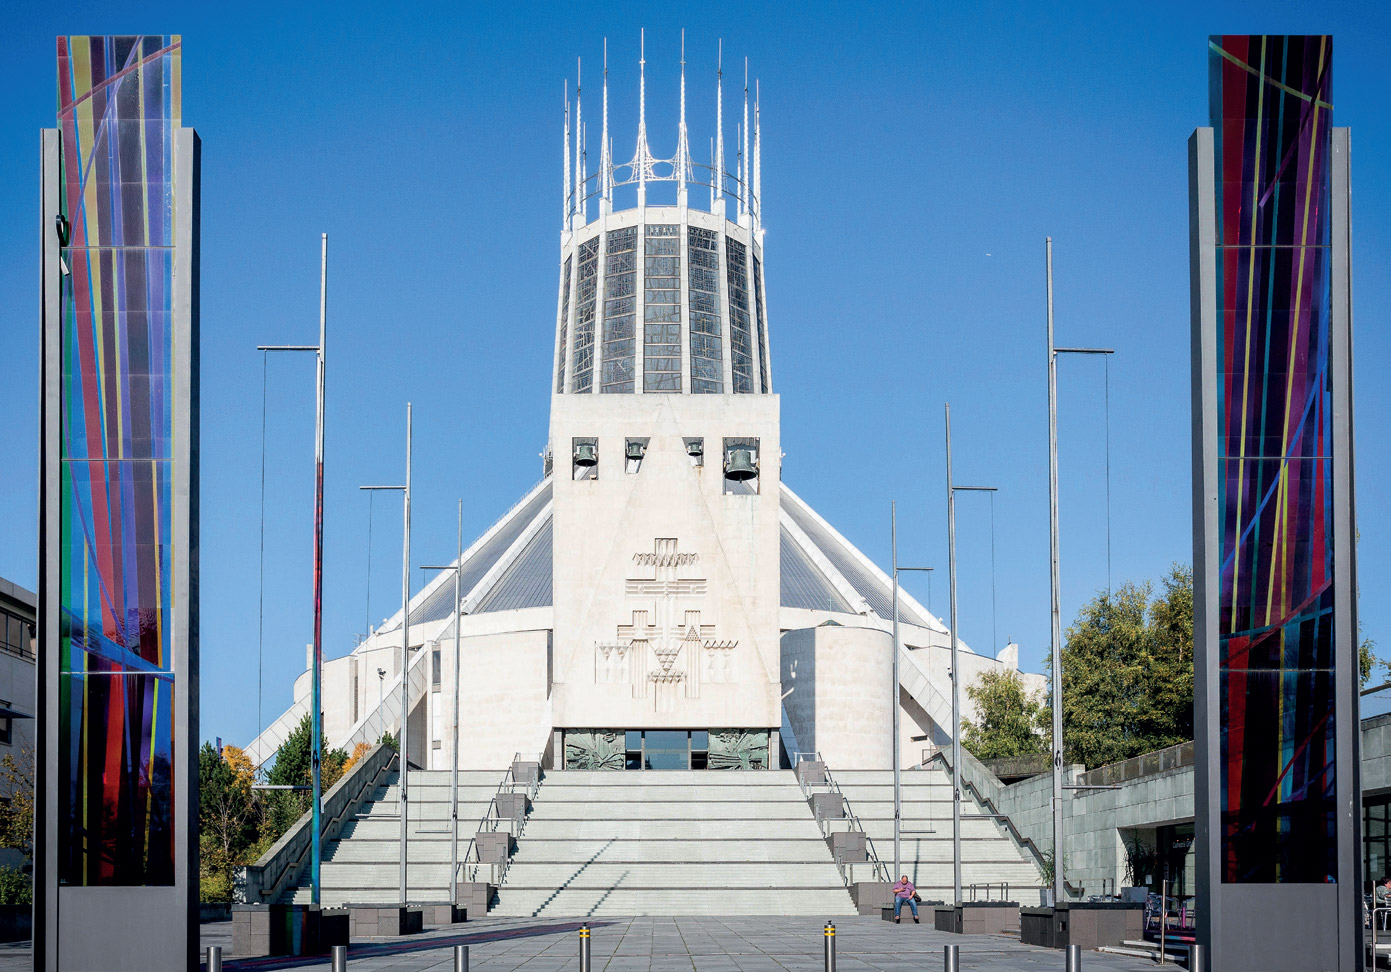 The Metropolitan Cathedral of Christ the King by Frederick Gibberd